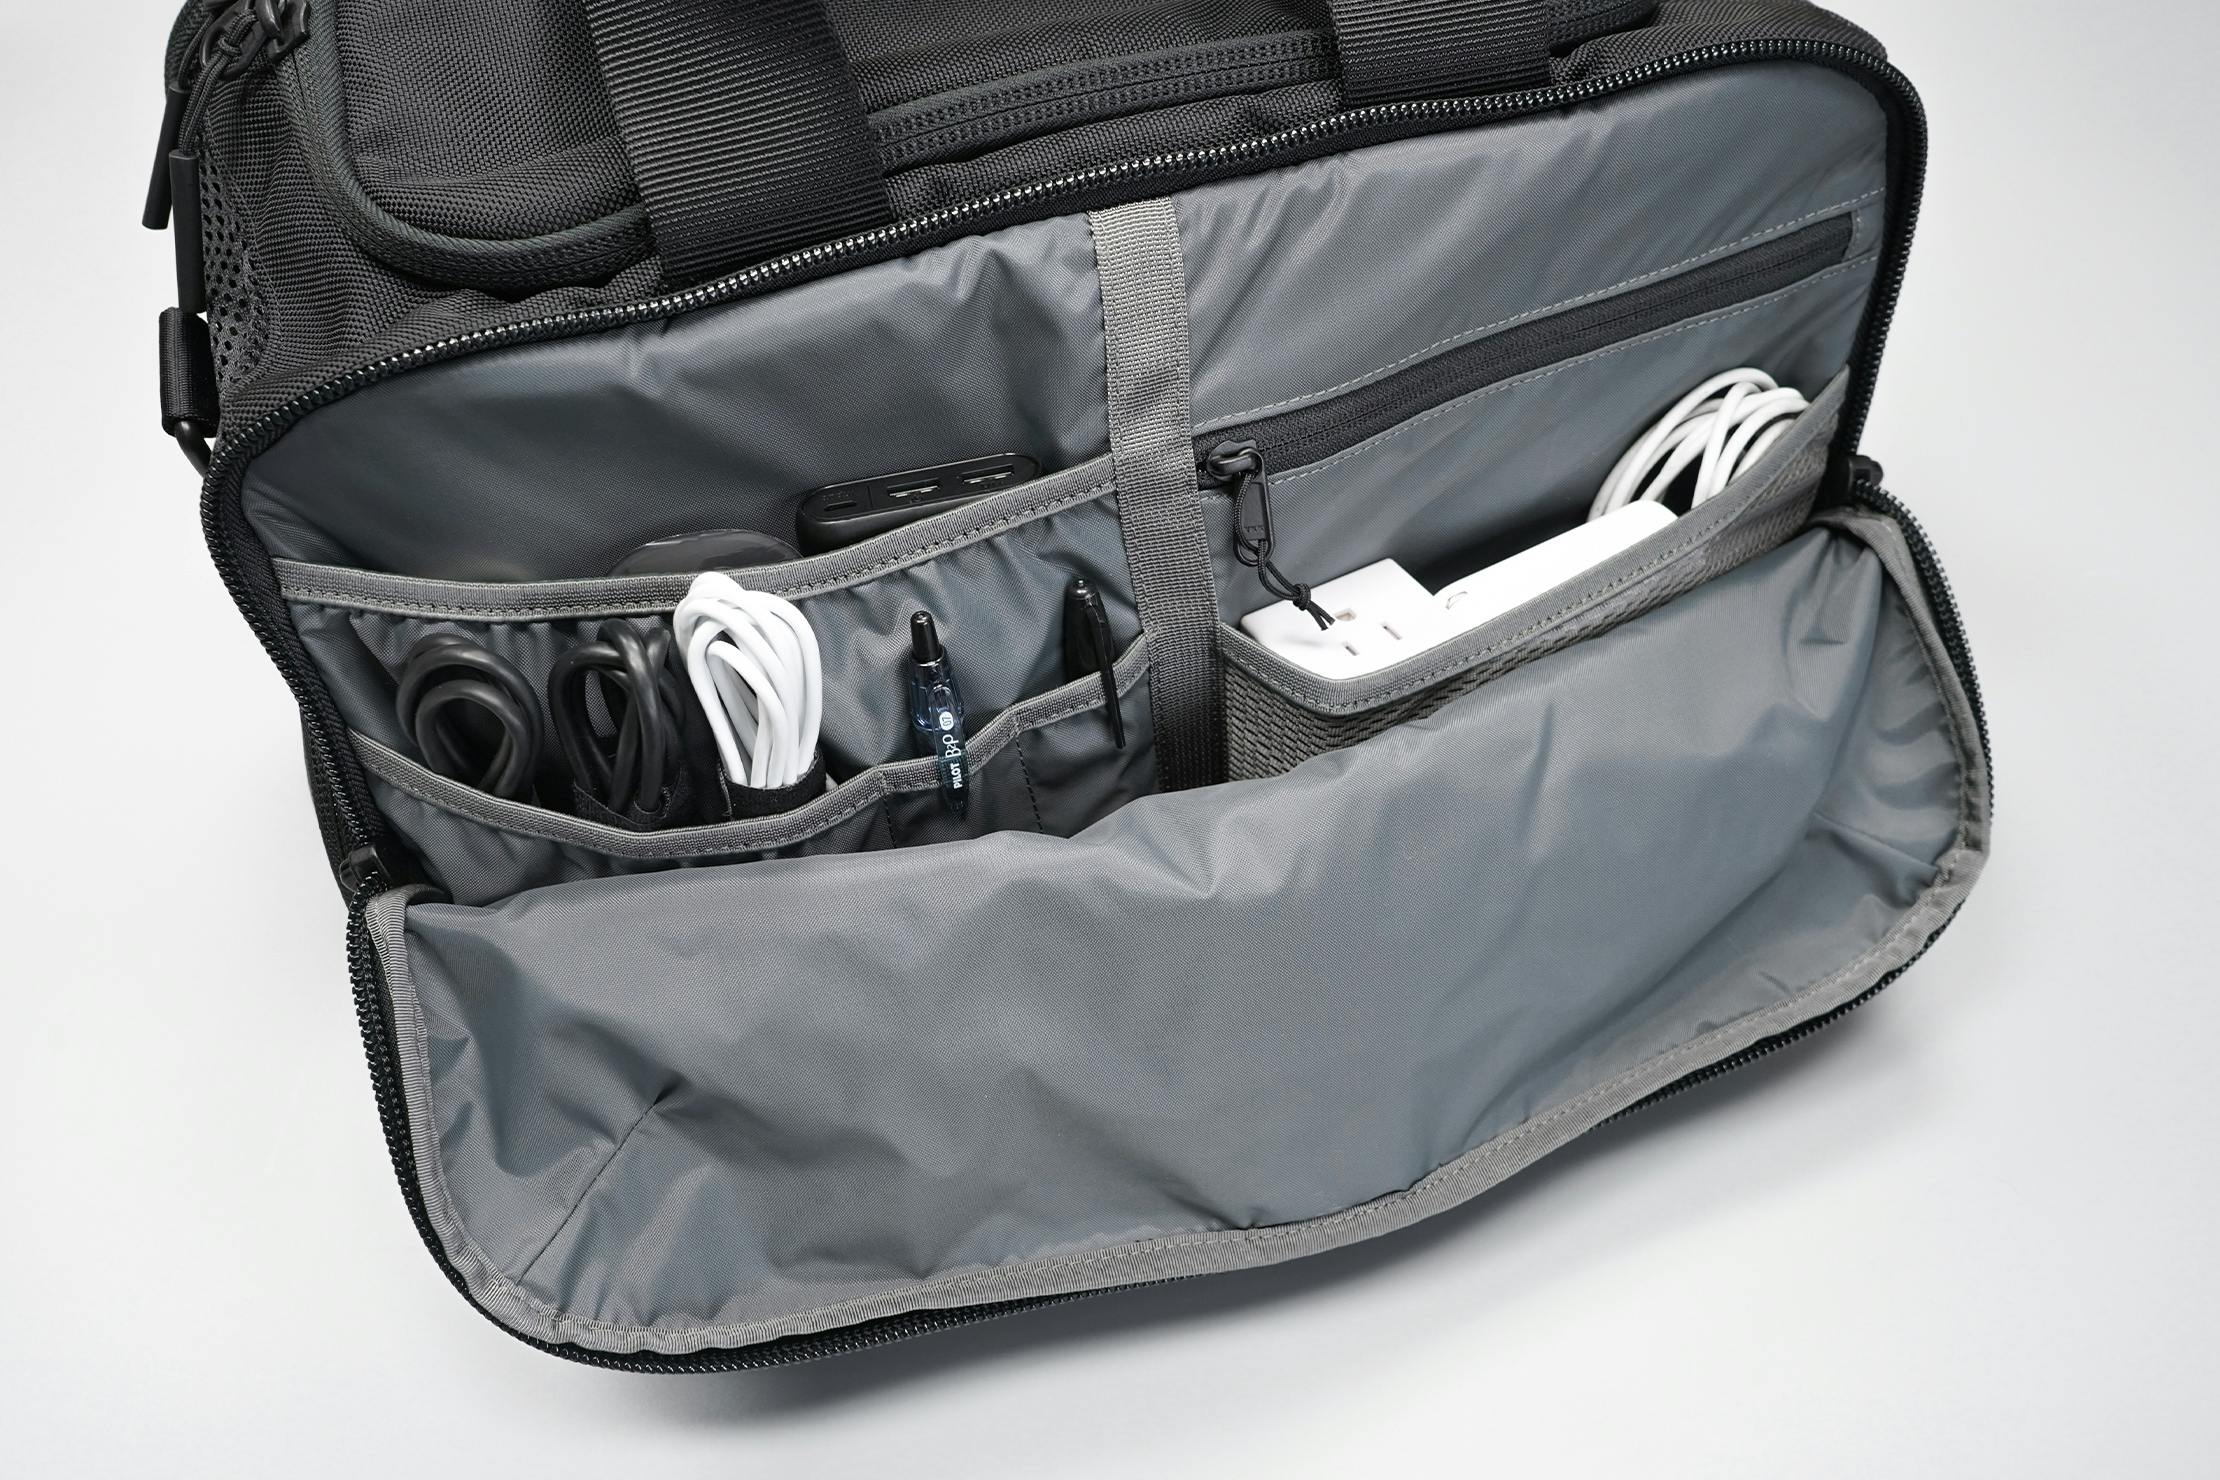 Aer Gym Duffel 3 Review | Pack Hacker